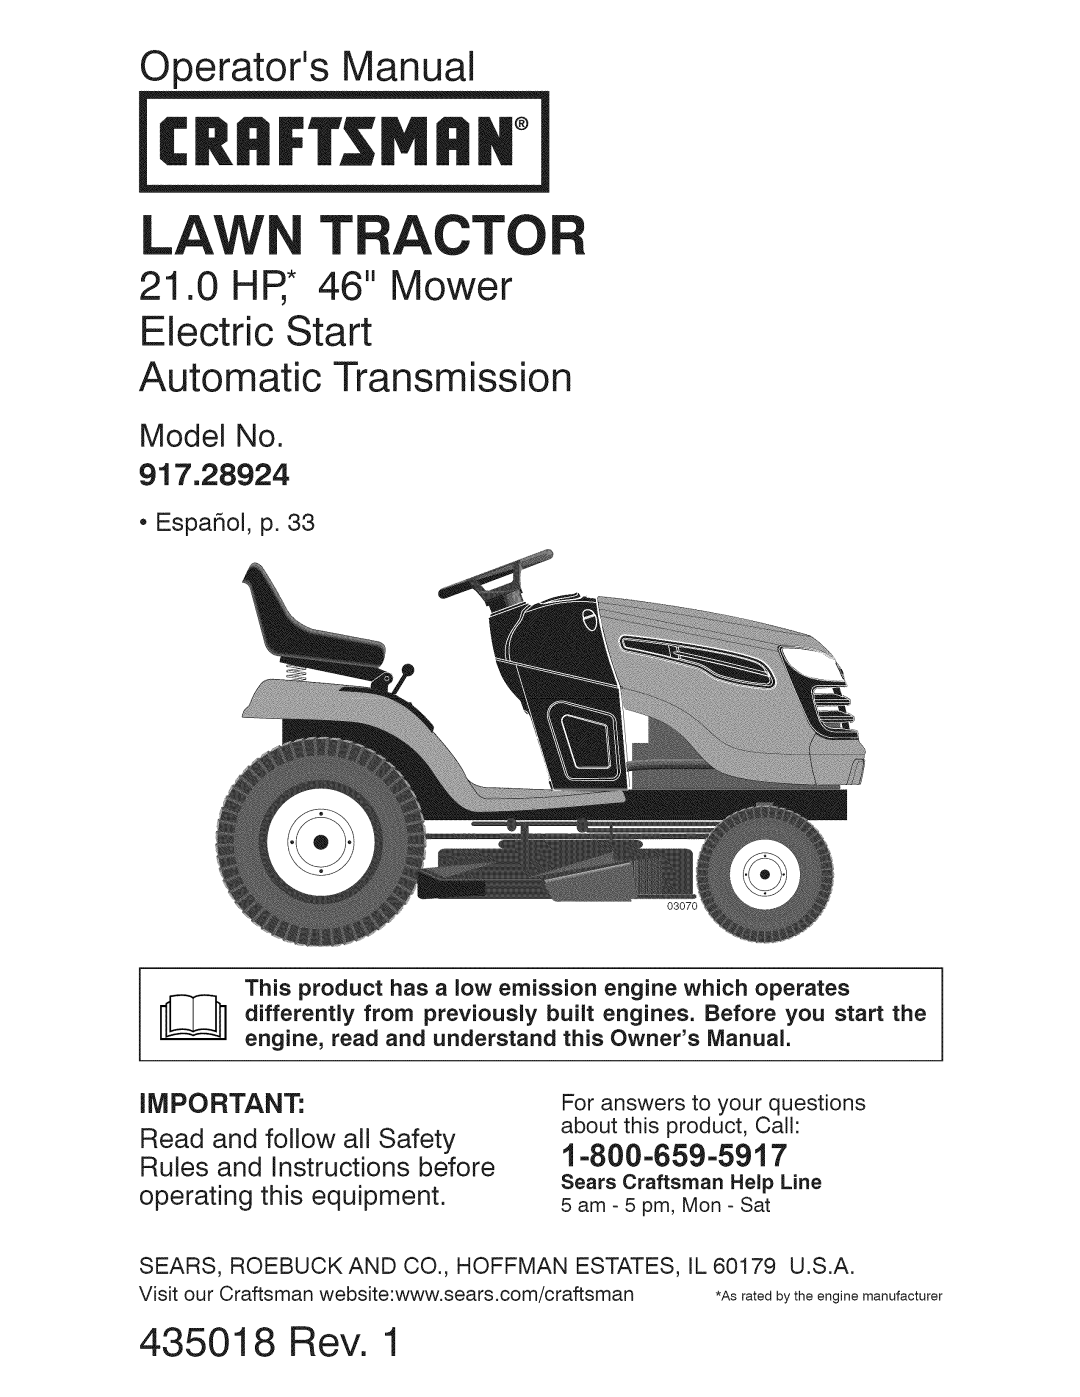 Craftsman 917.289244 owner manual LAW Tracto 